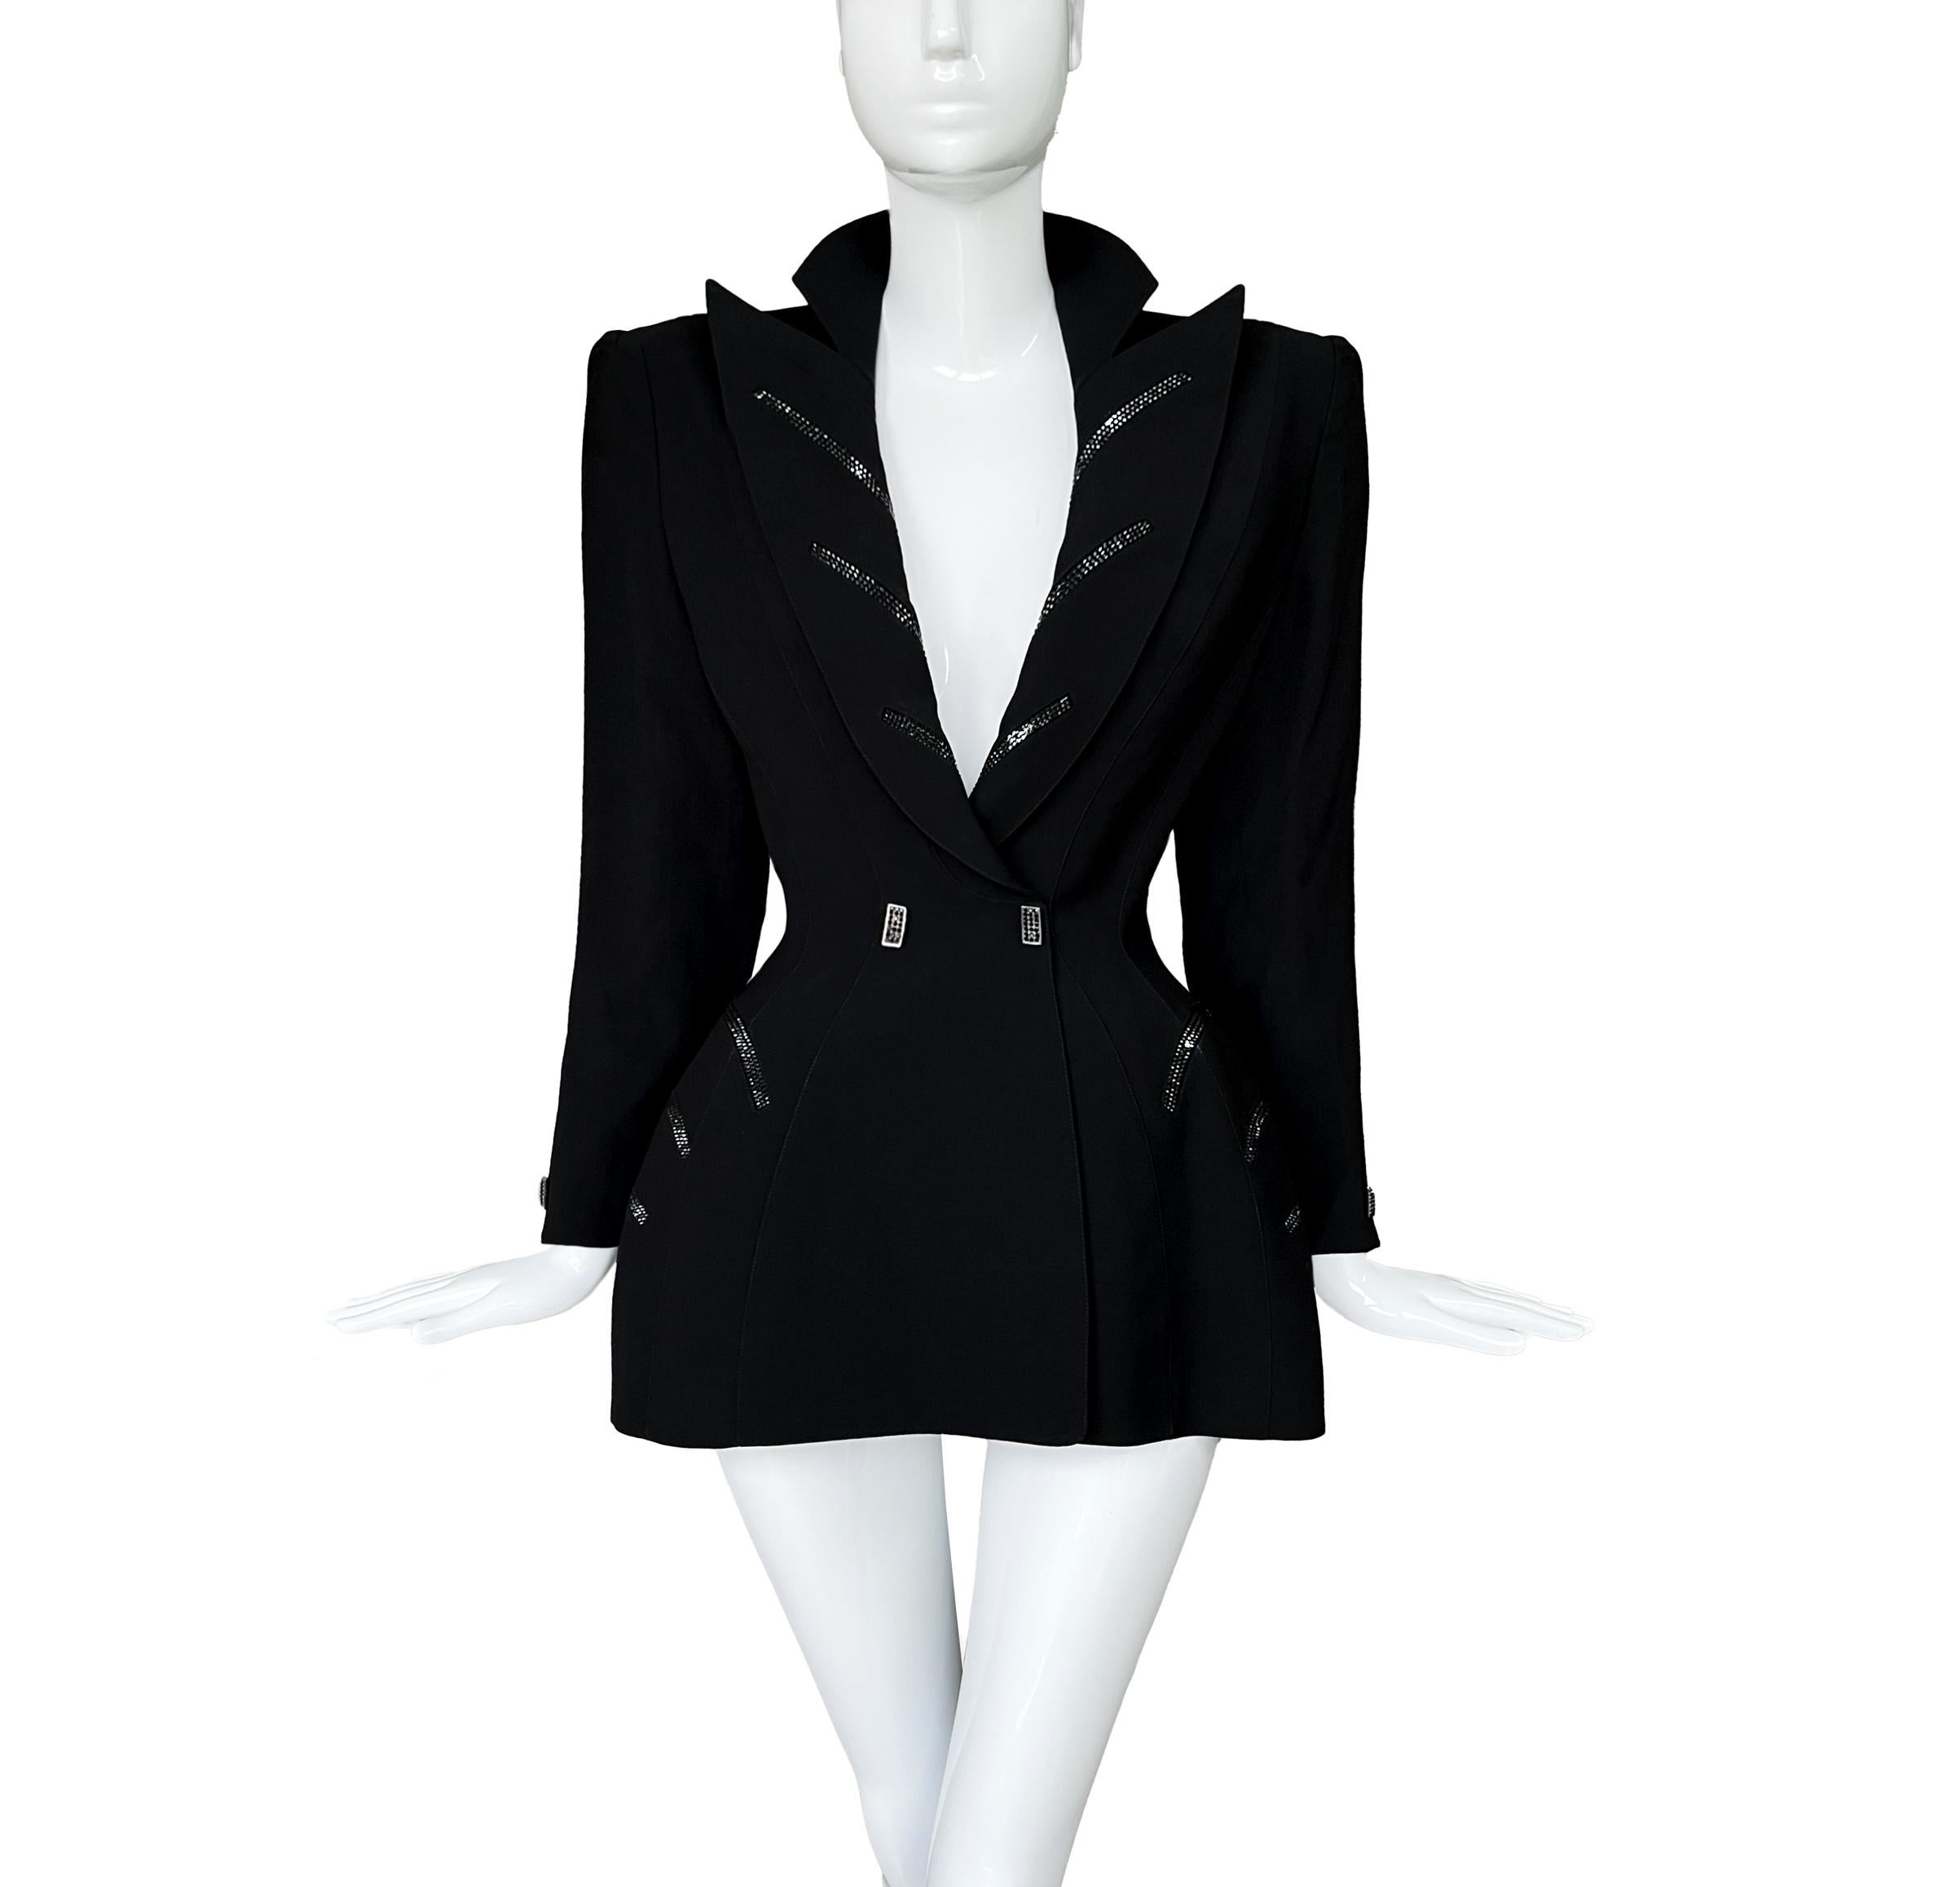 Women's Thierry Mugler Jacket FW 1998 Glamour Dramatic Black Glitter Details For Sale